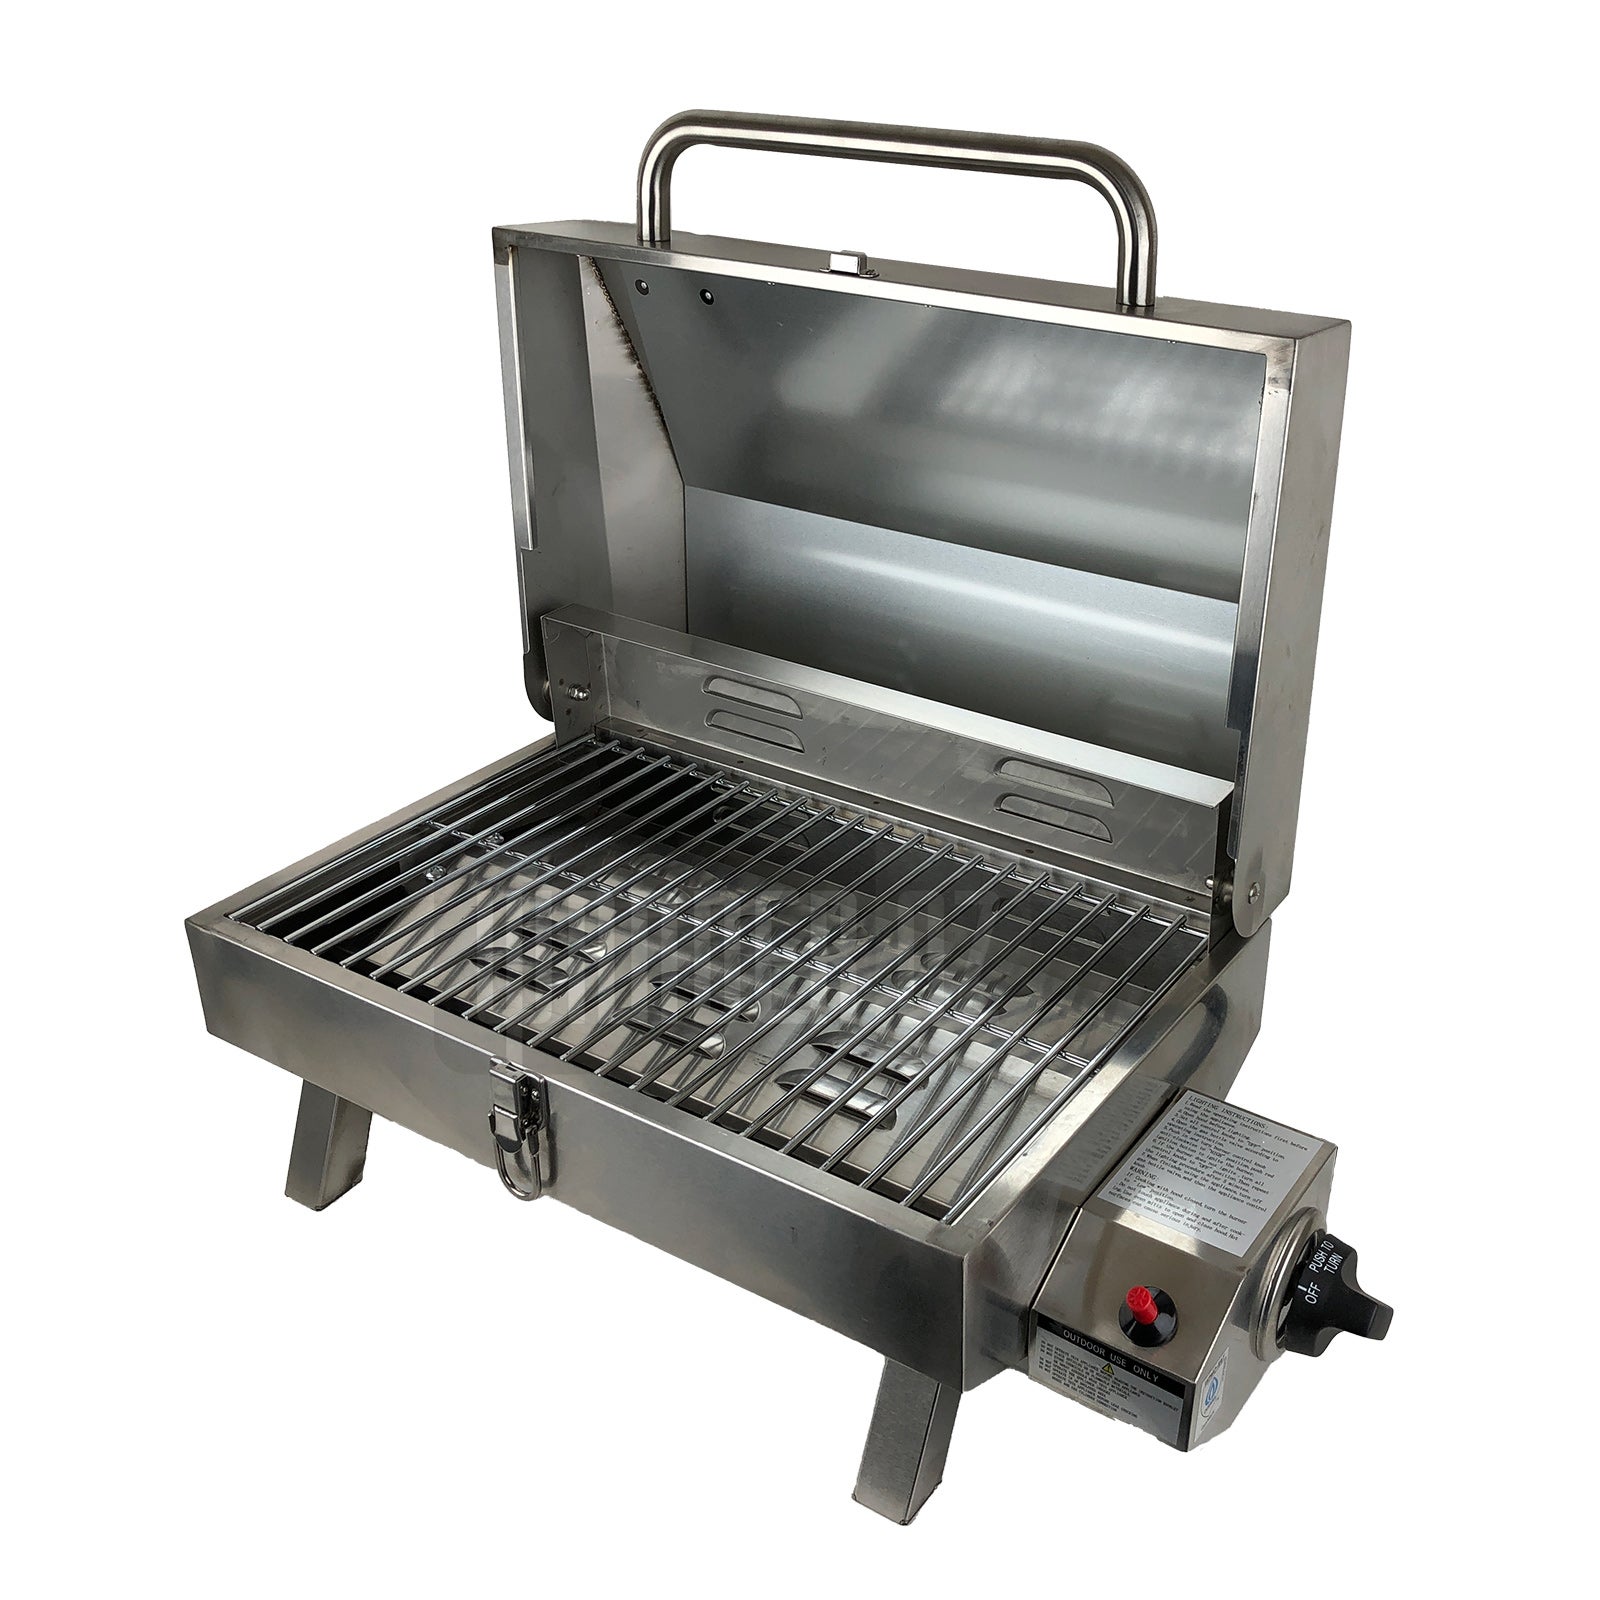 Portable Gas BBQ Stainless Steel Outdoor Camping Cooking Caravan